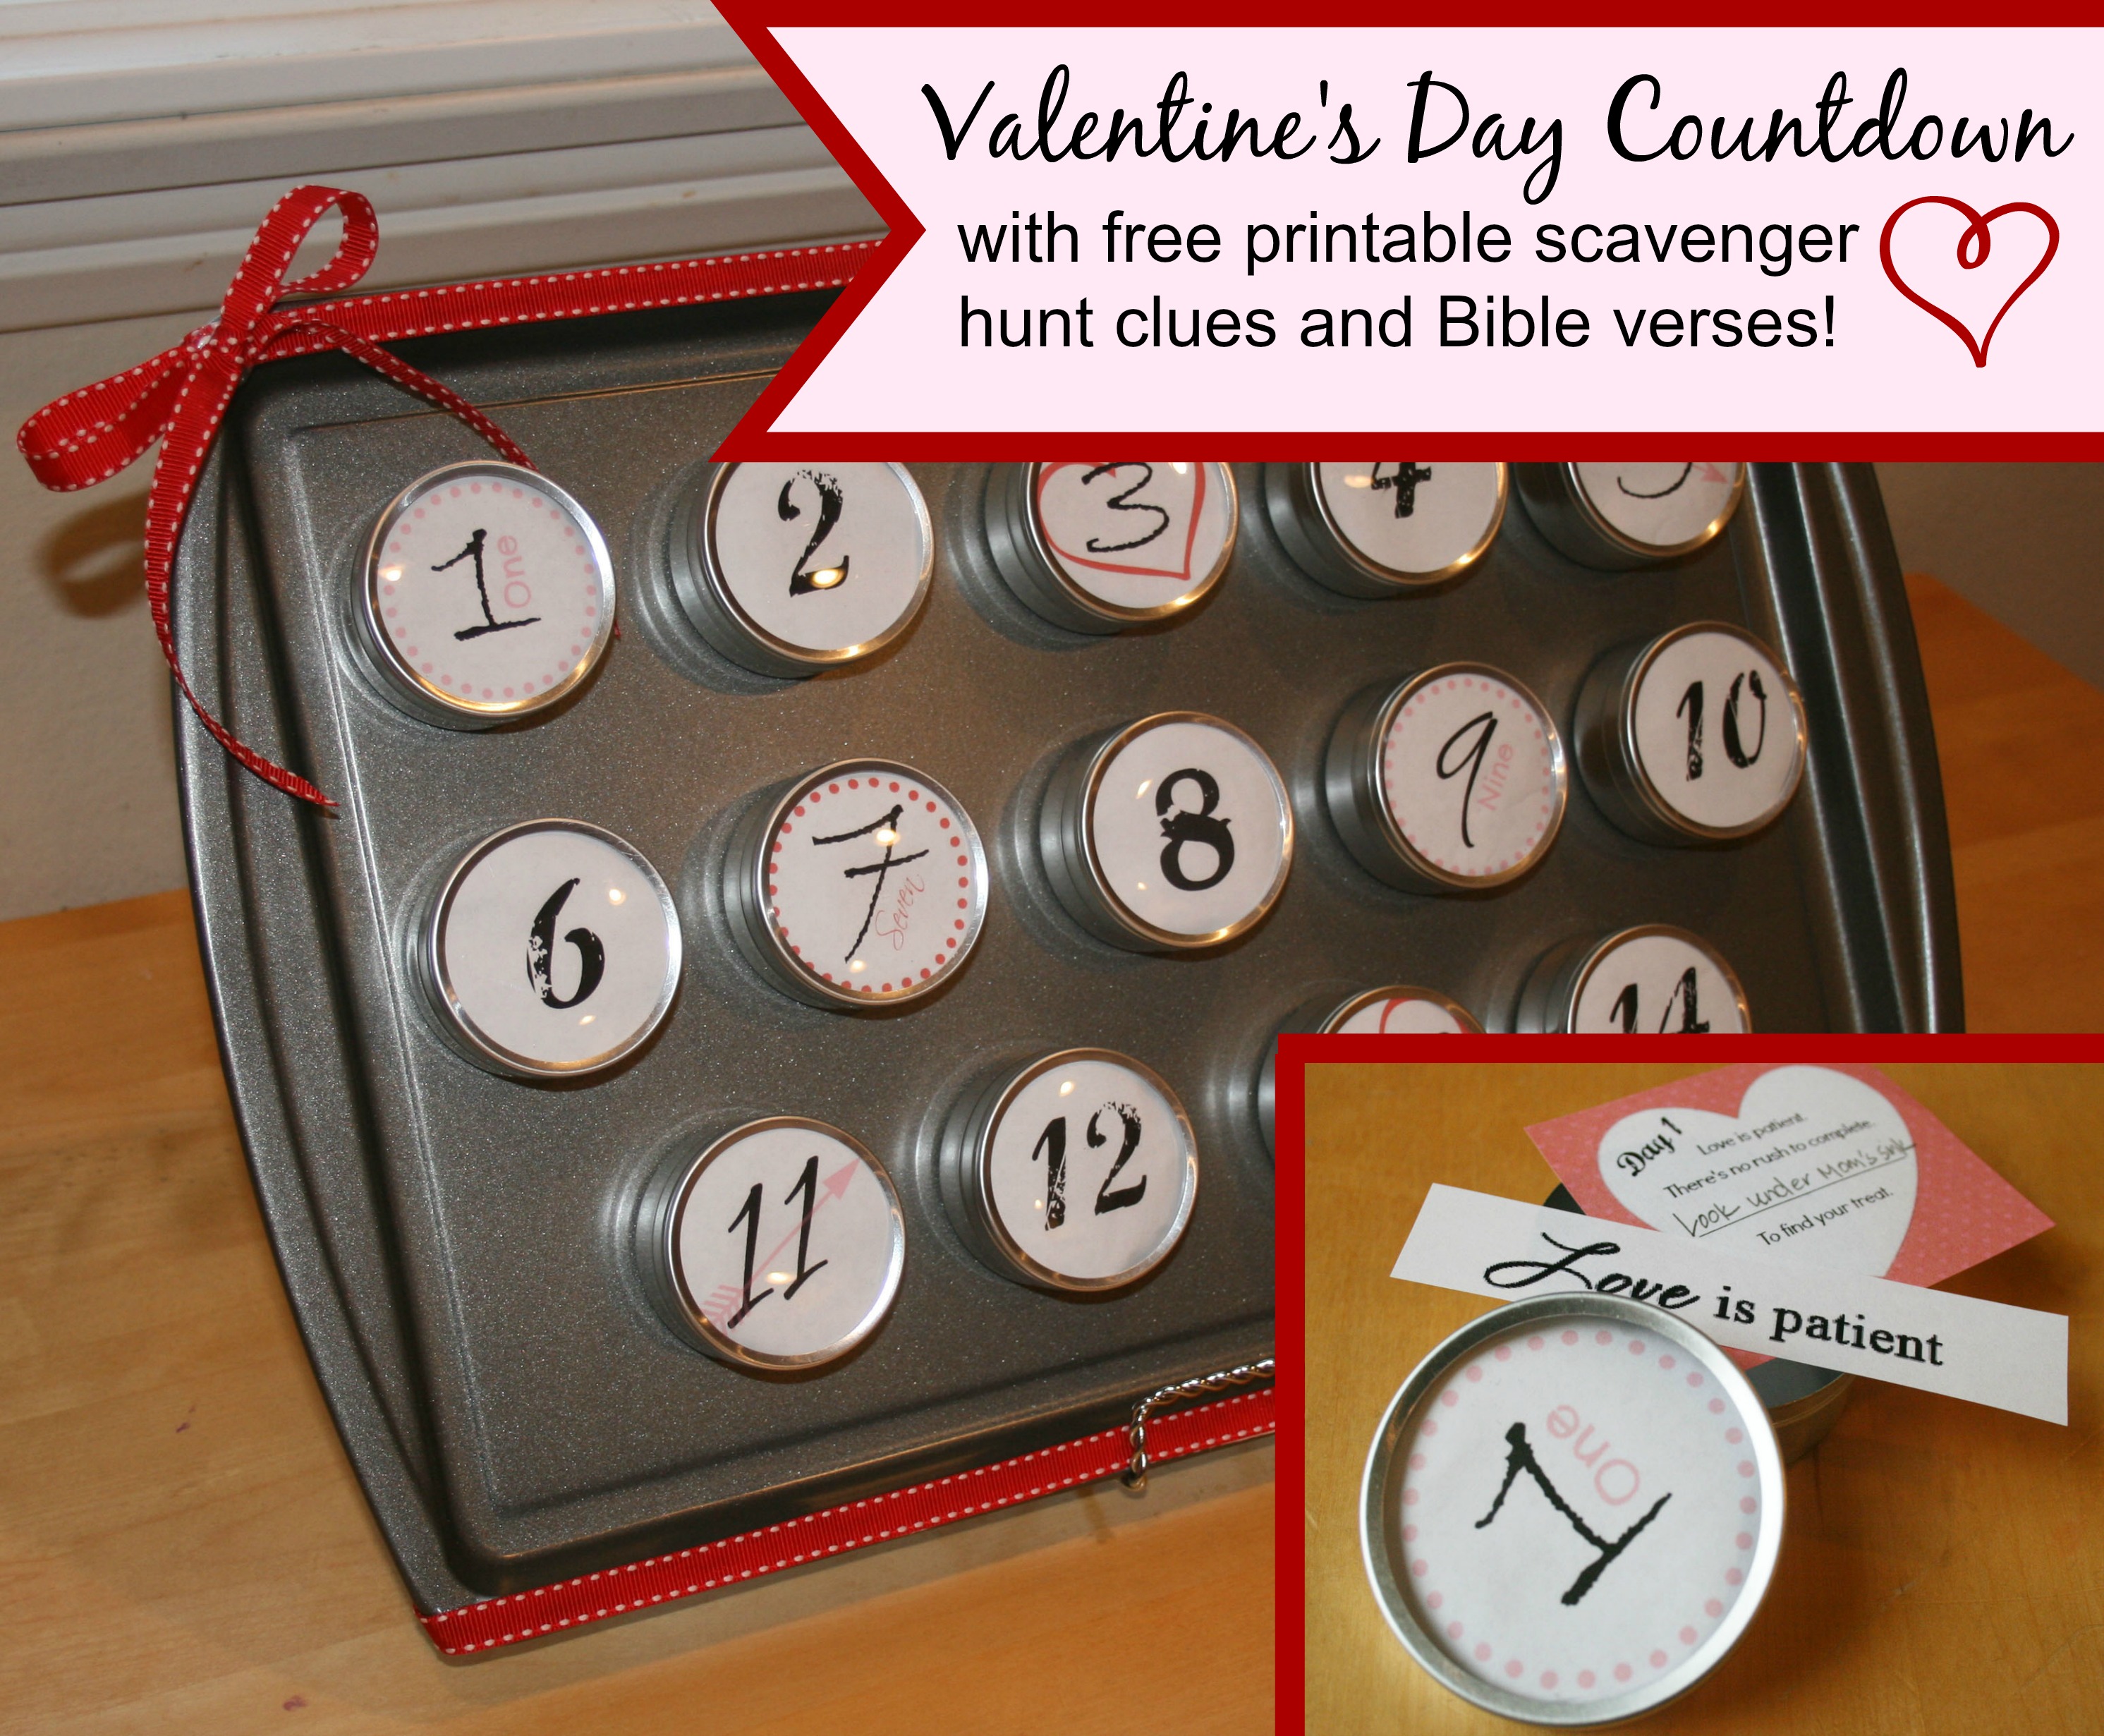 Valentine's Day Countdown with Scavenger Hunt and Bible Verses